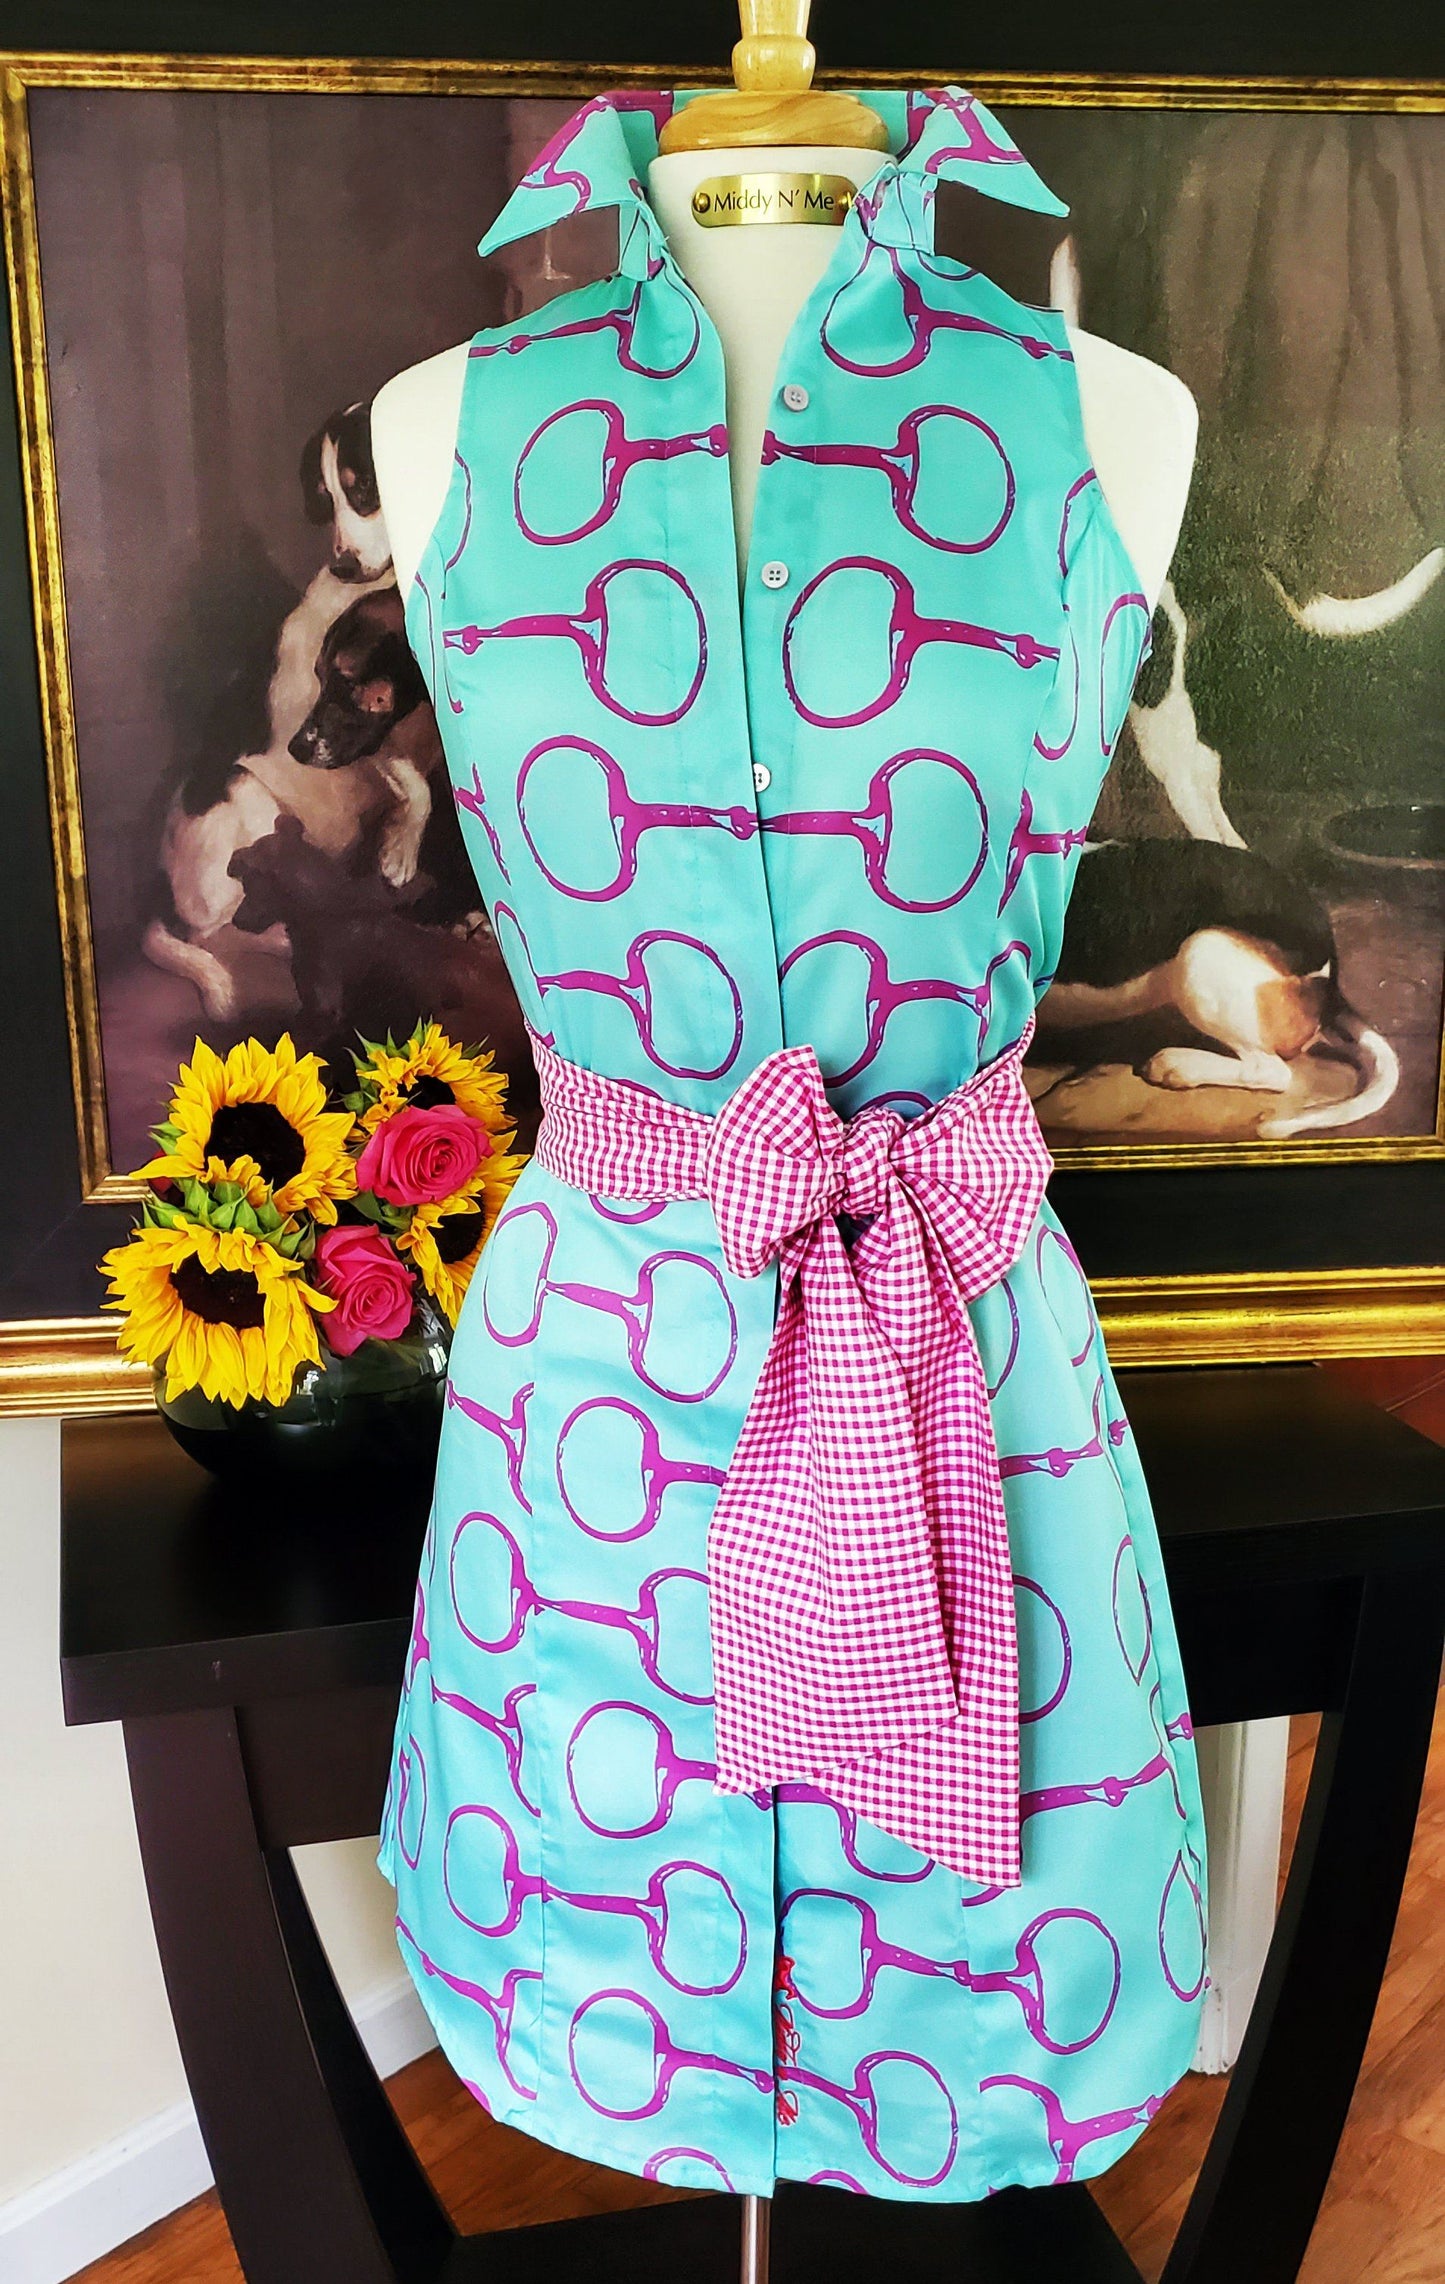 SUMMER SNAFFLES DRESS WITH SASH - Middy N' Me